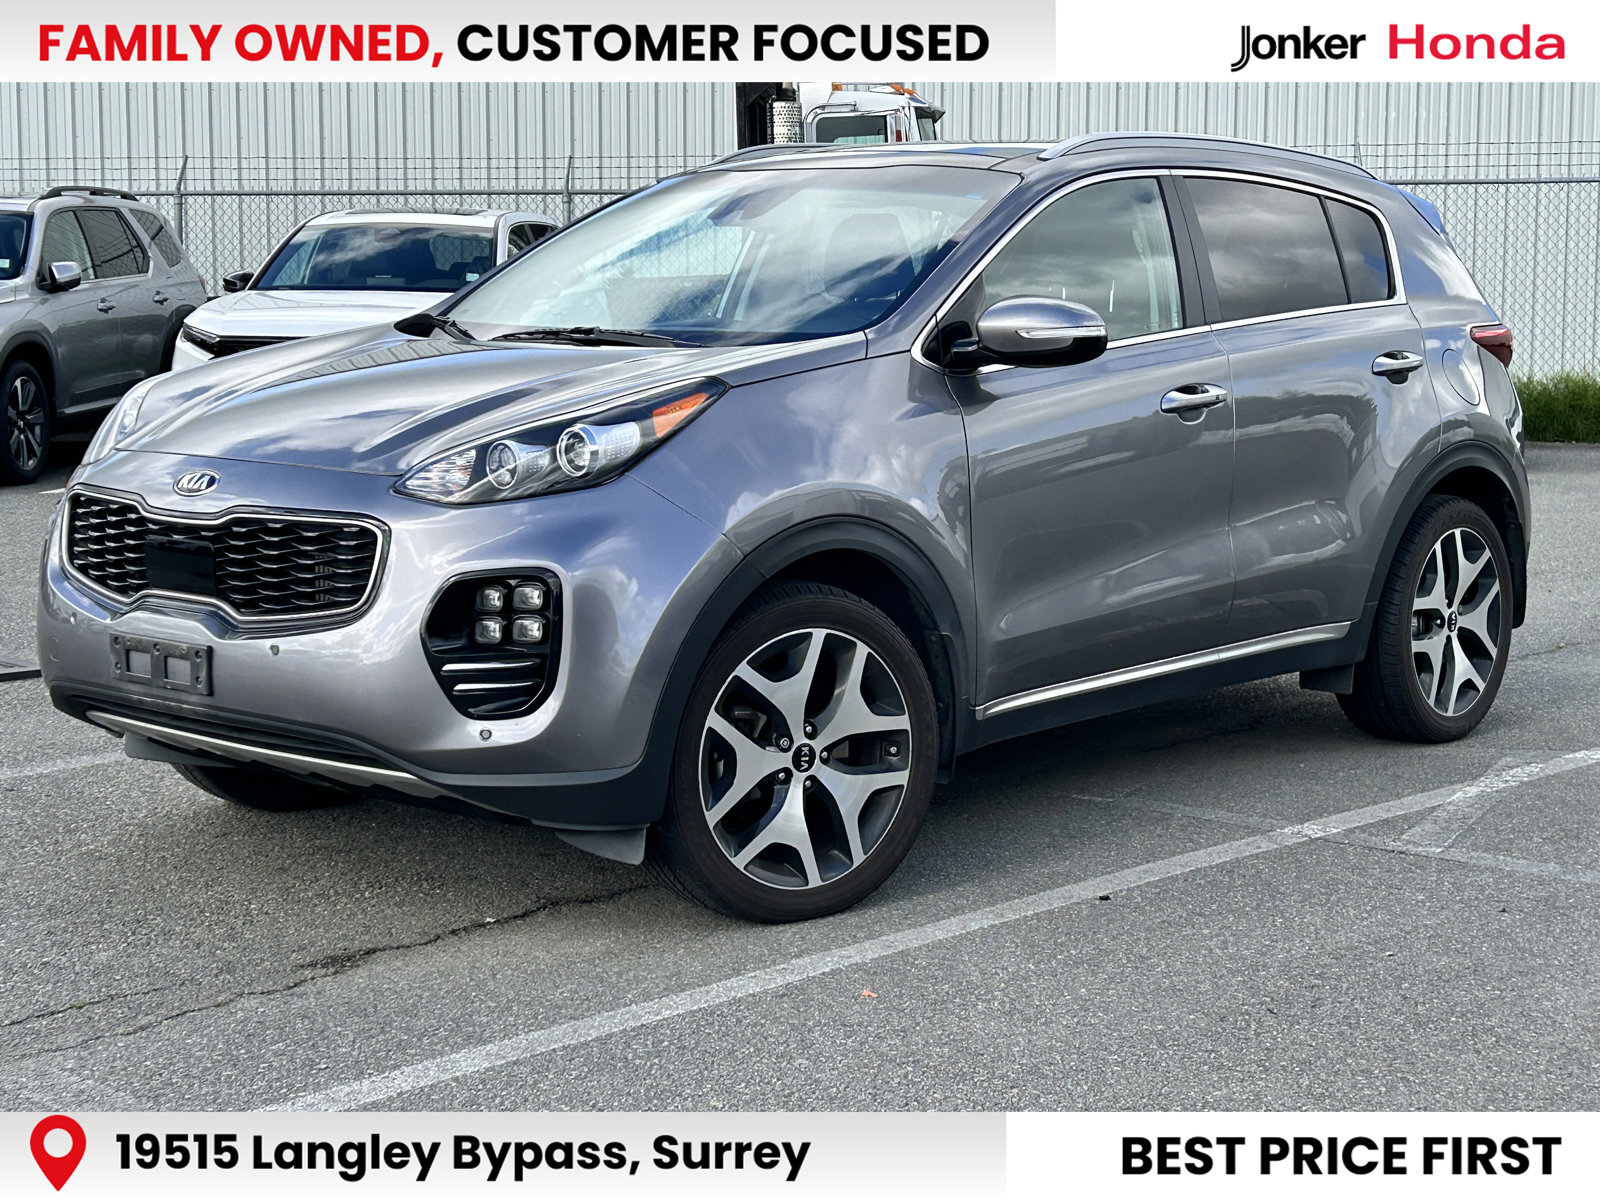 2017 Kia Sportage One Owner, Local Car, No Accidents